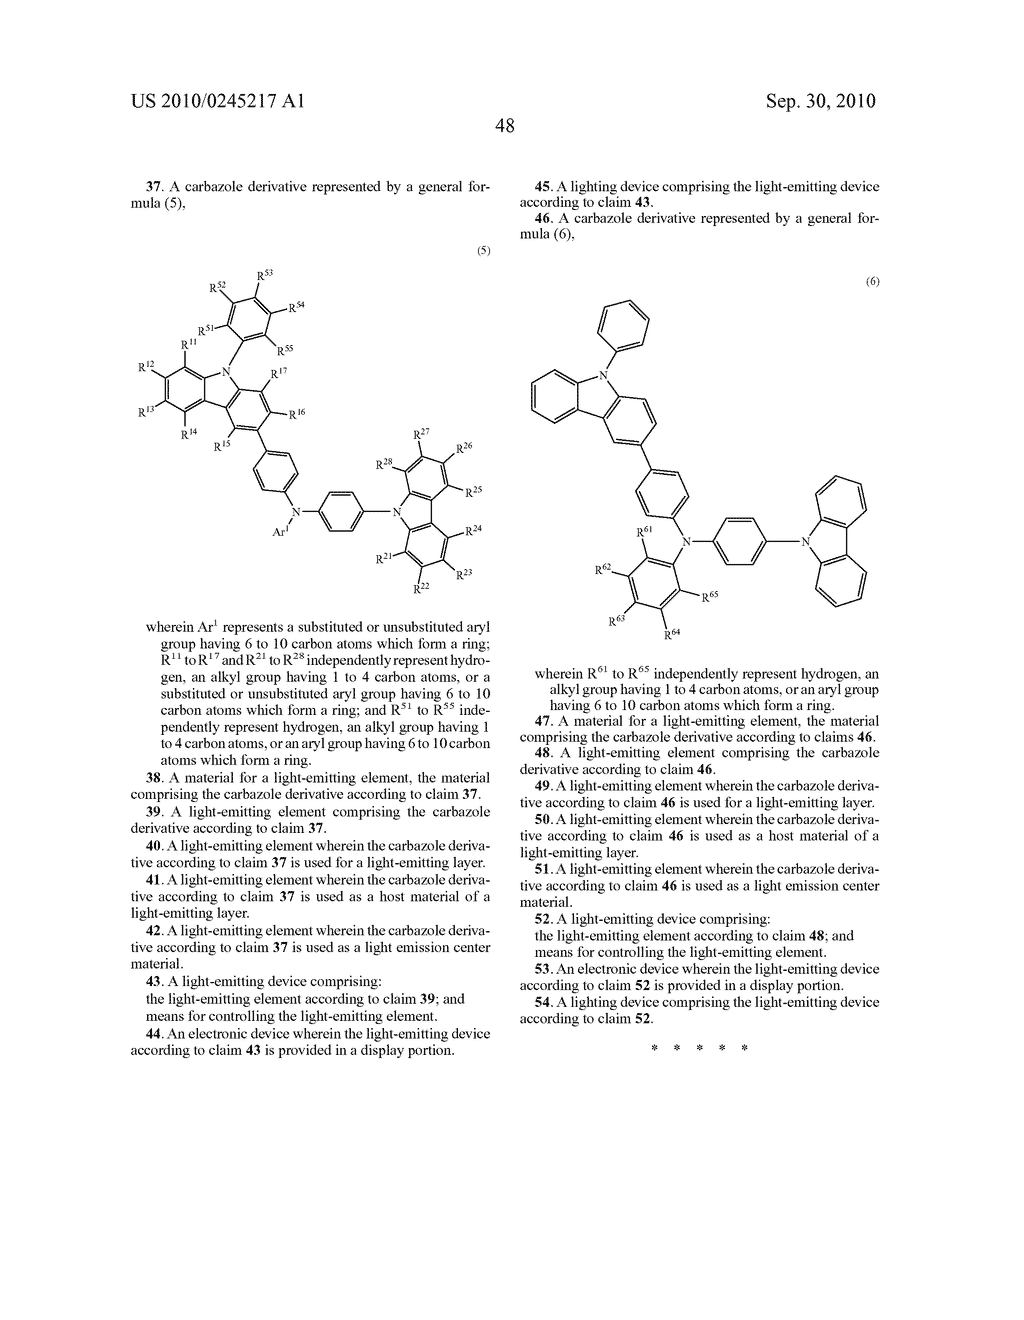 CARBAZOLE DERIVATIVE, LIGHT-EMITTING ELEMENT MATERIAL, LIGHT-EMITTING ELEMENT, LIGHT-EMITTING DEVICE, ELECTRONIC DEVICE, AND LIGHTING DEVICE - diagram, schematic, and image 76